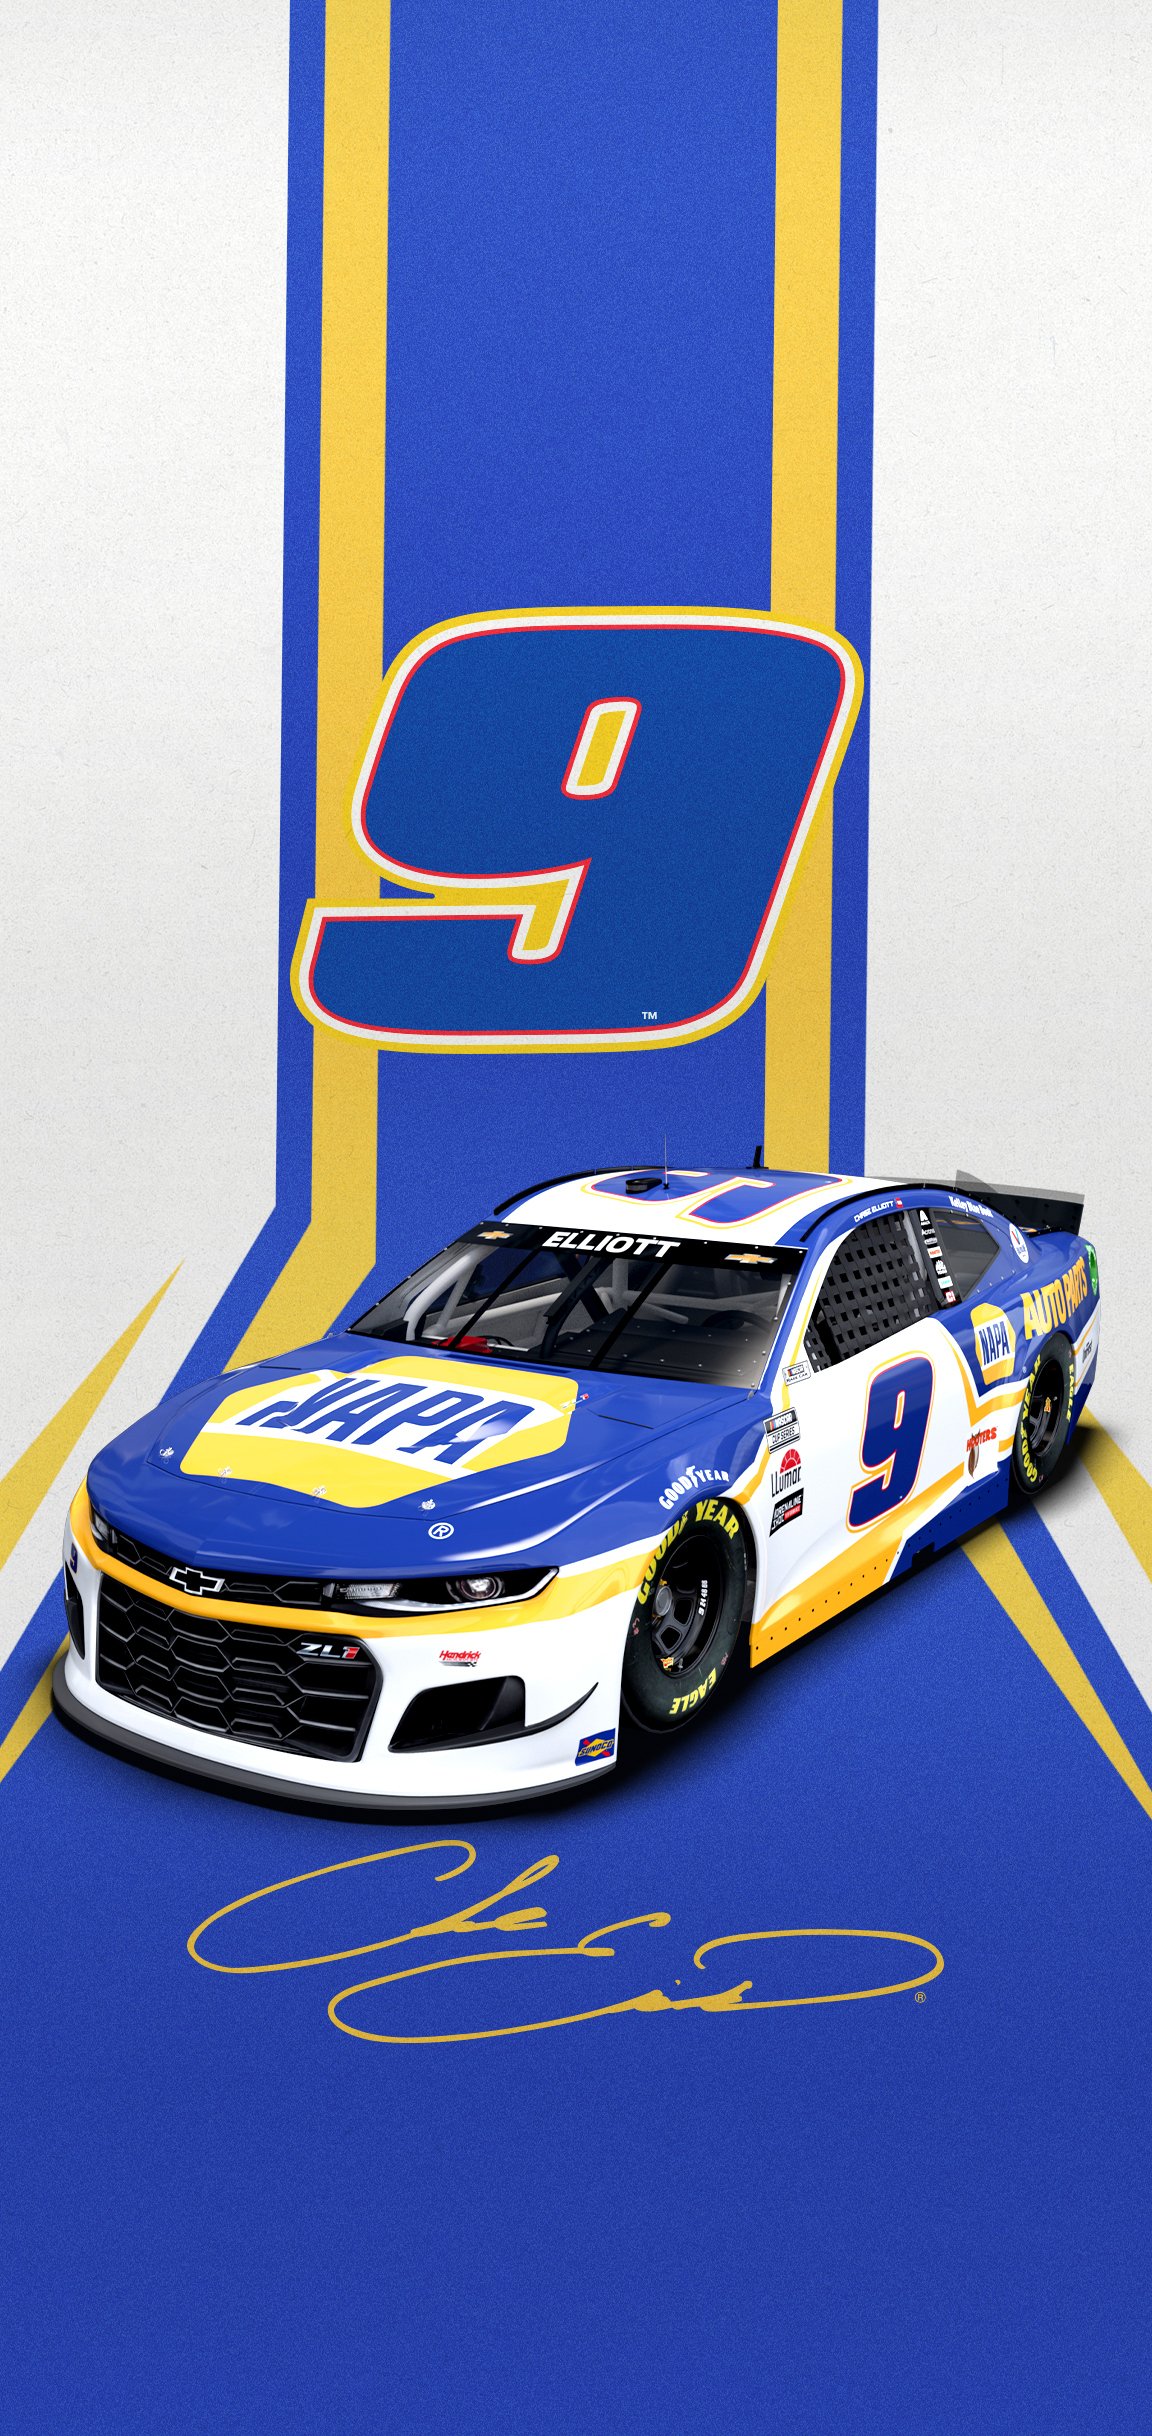 NASCAR -. fans, go ahead and update that wallpaper